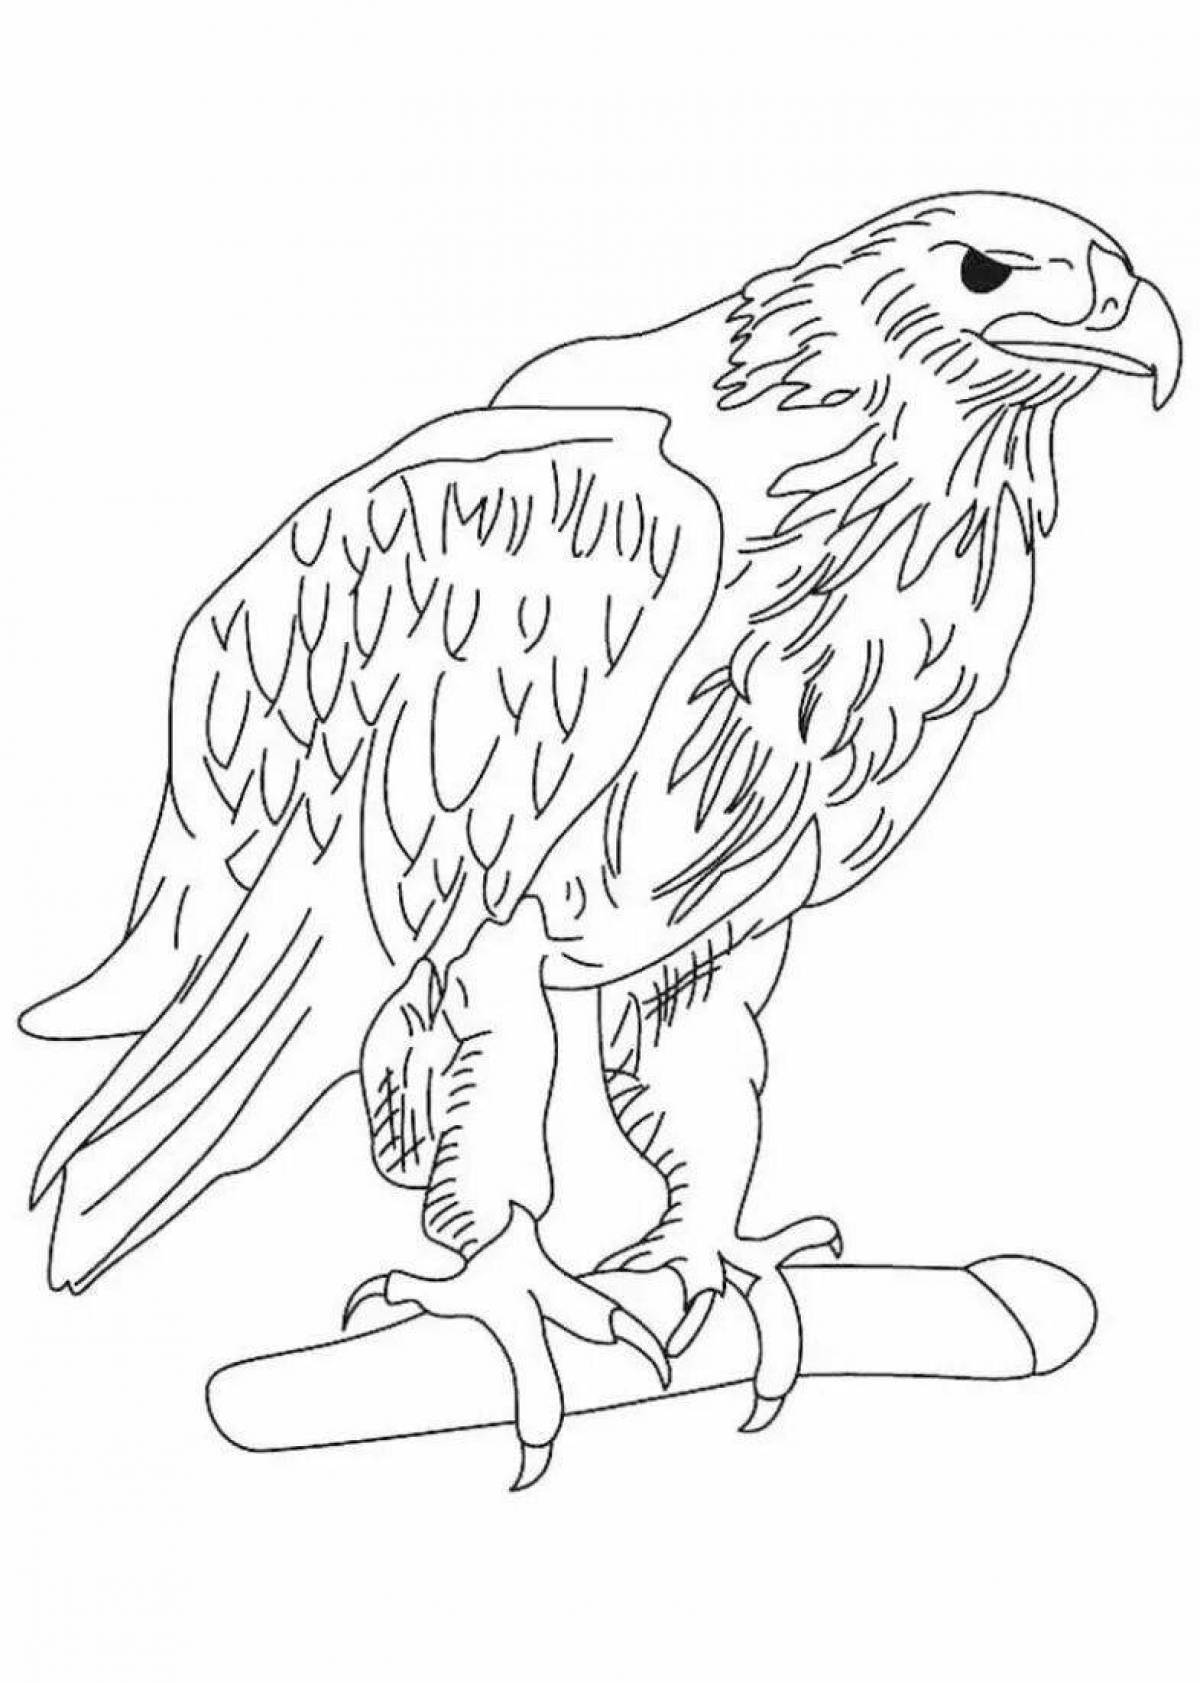 Strike Eagle coloring page